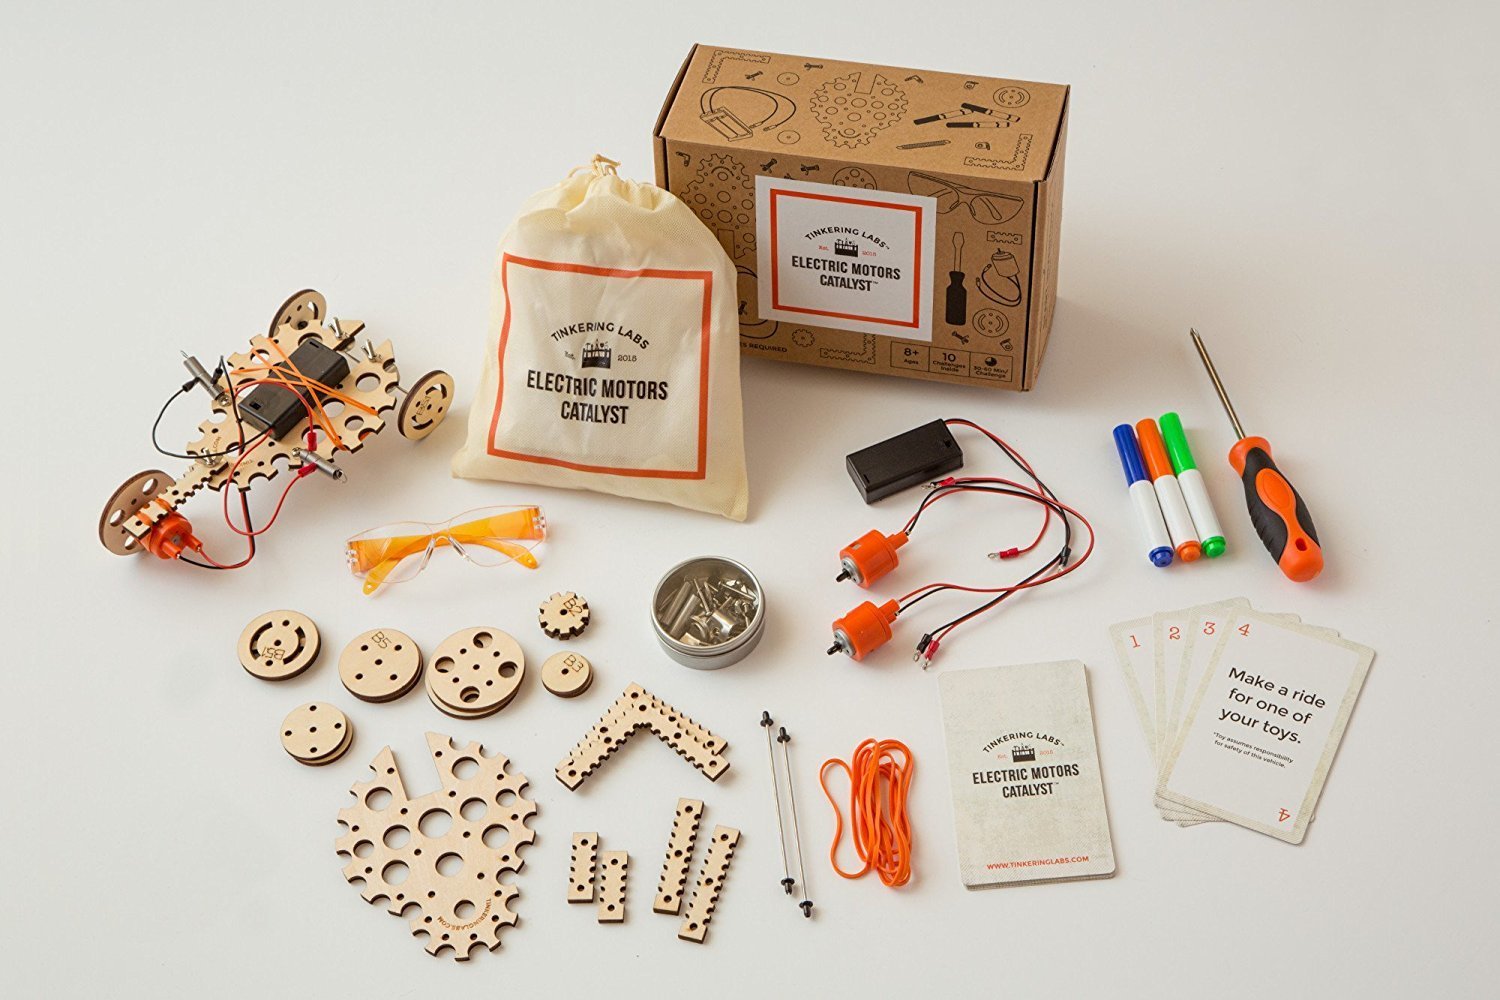 stem gifts for boys